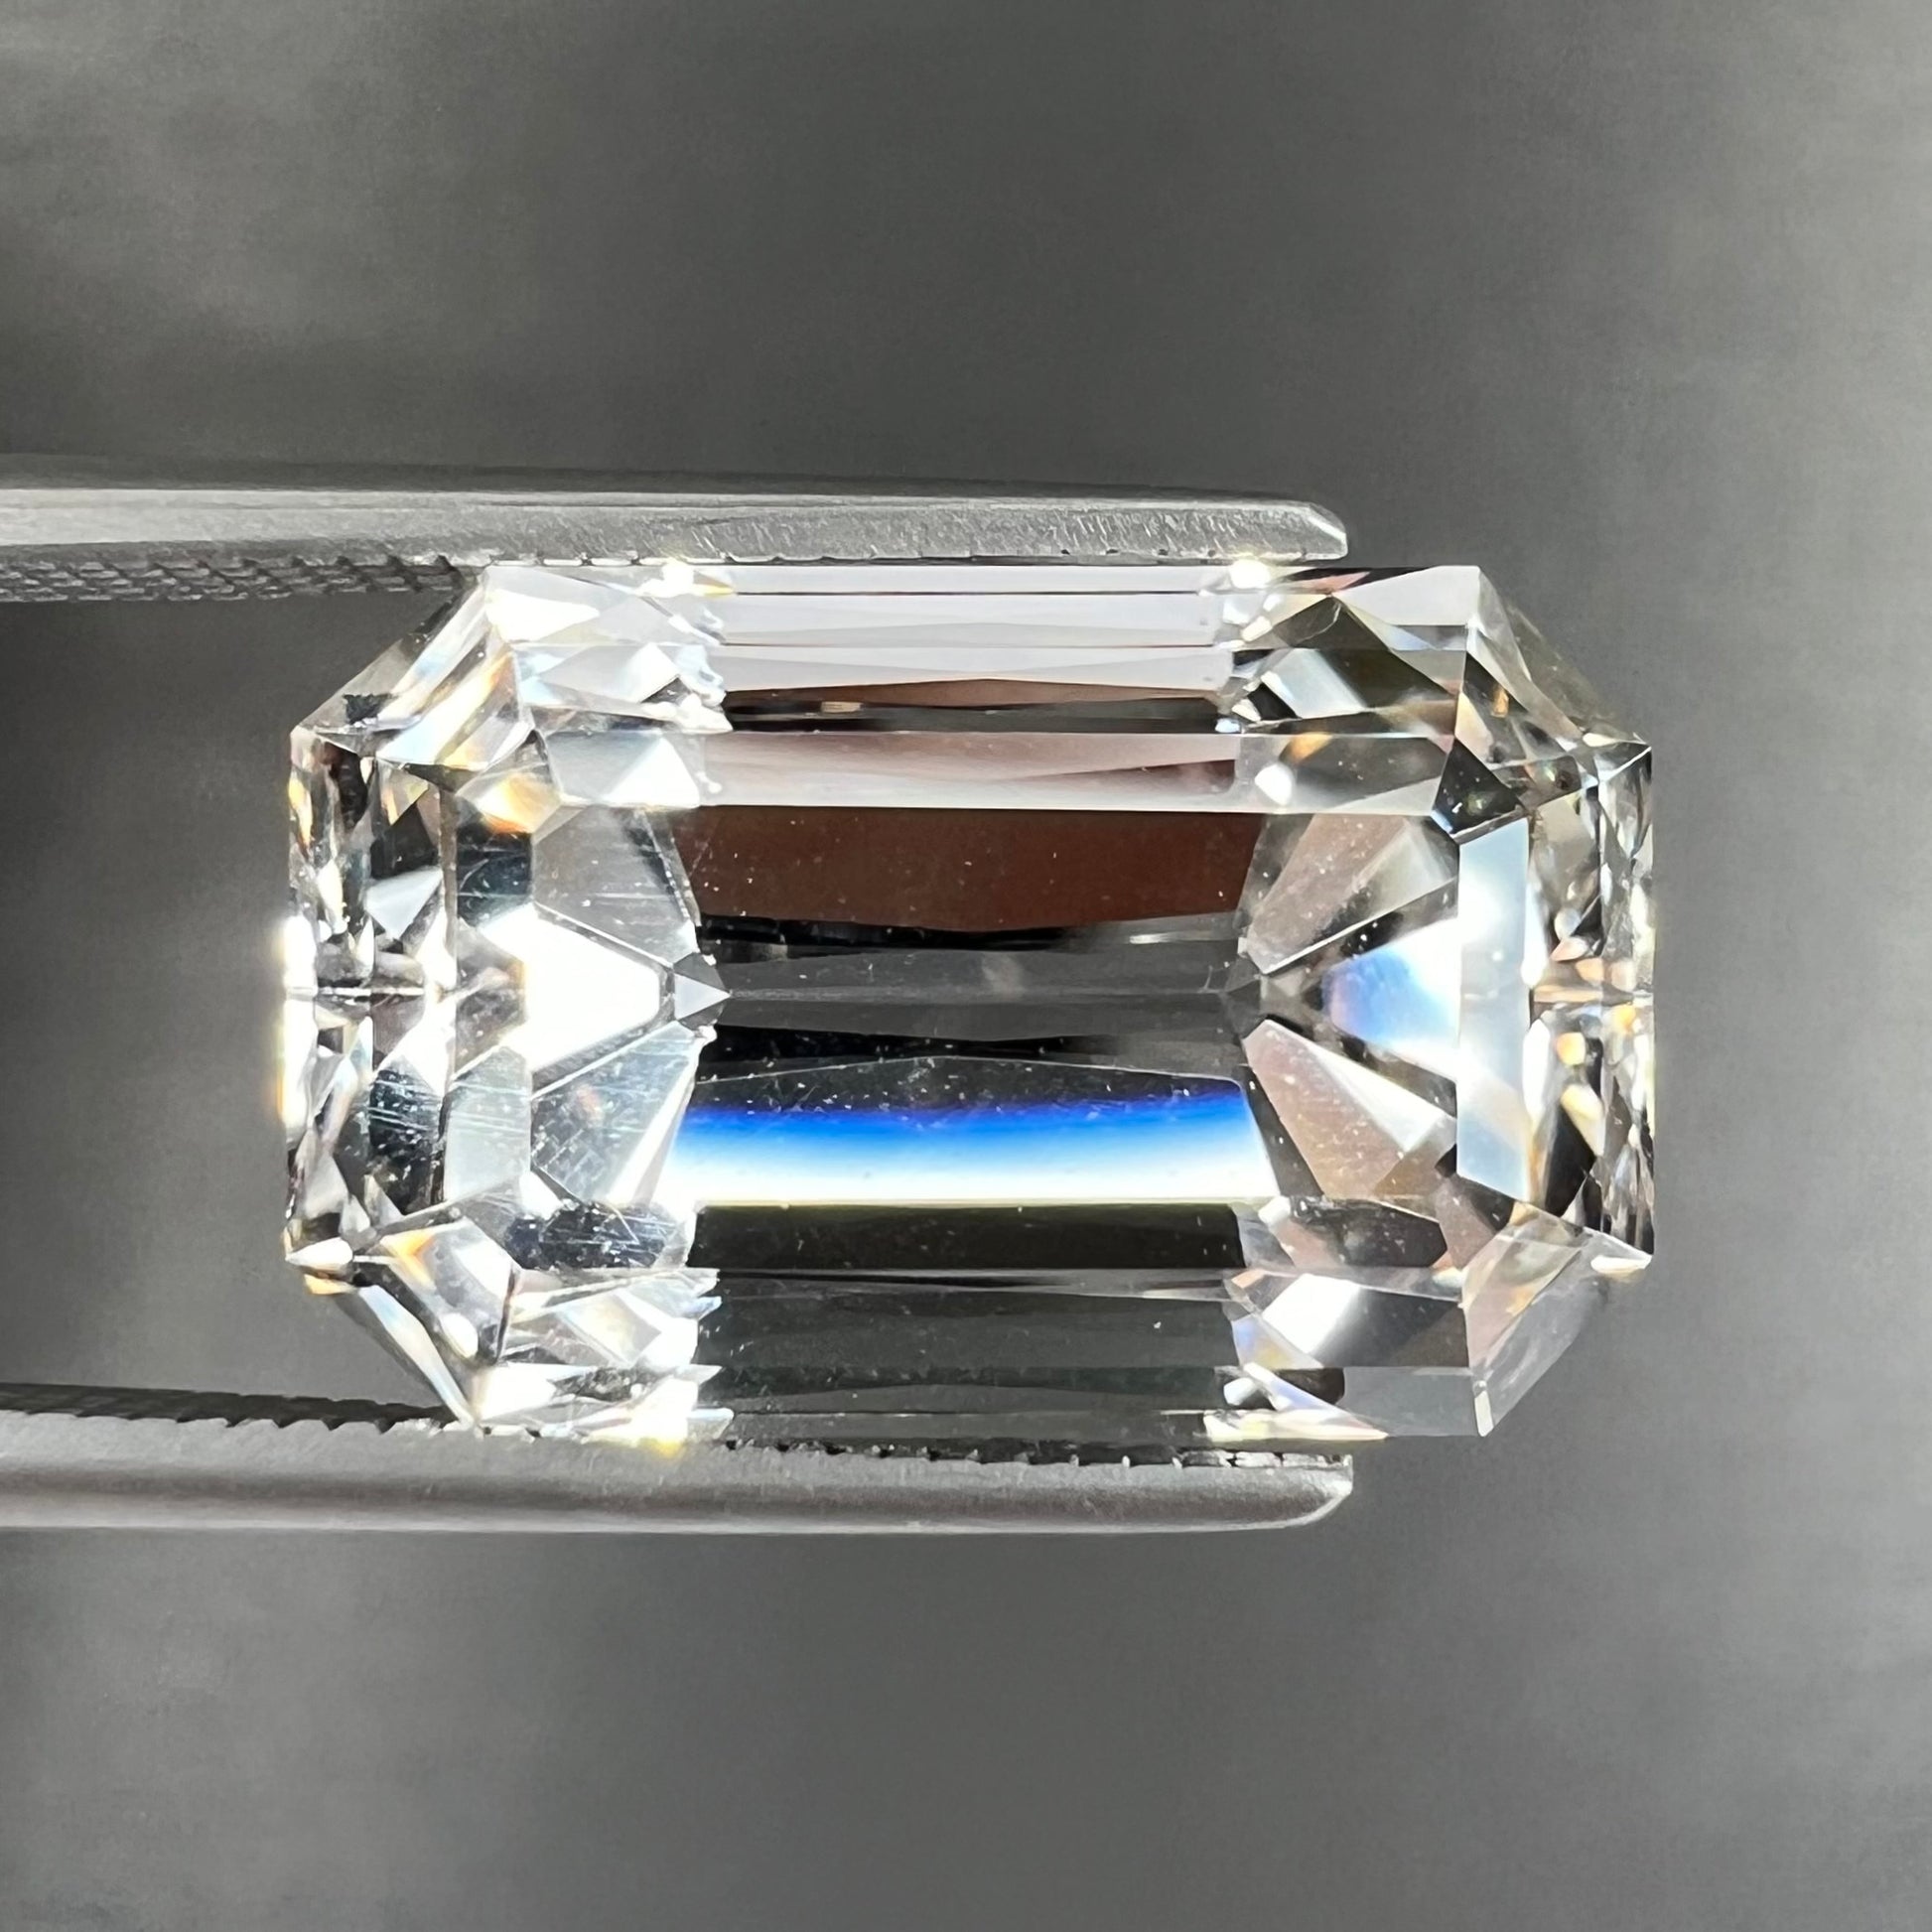 A loose, emerald cut topaz gemstone from Russia.  The stone is a faint pinkish white color.